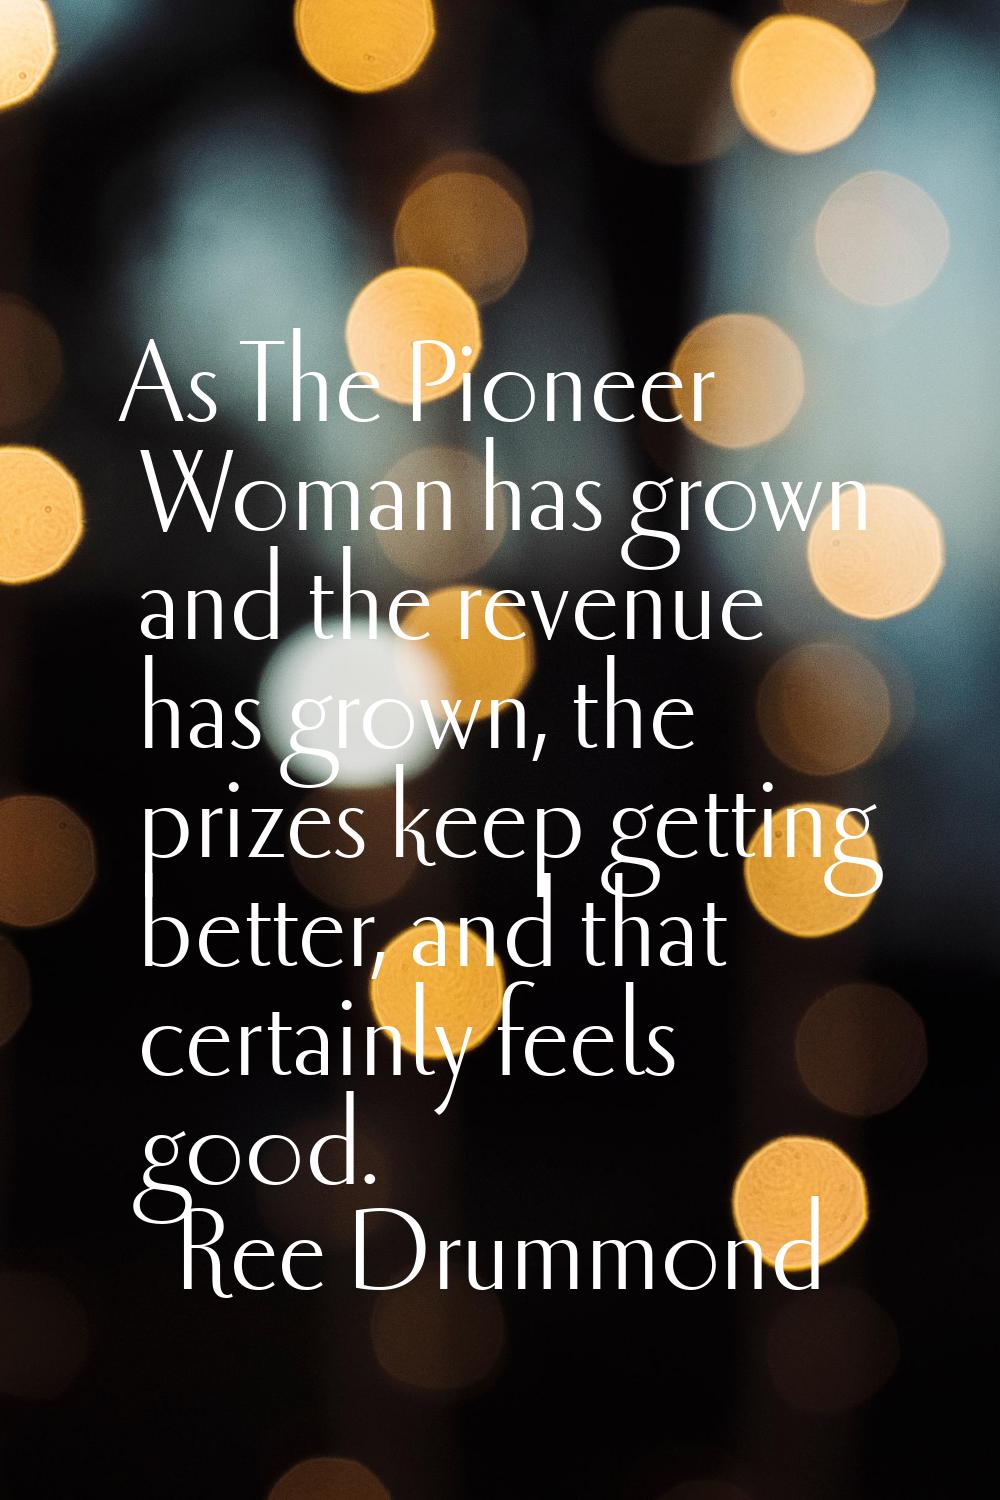 As The Pioneer Woman has grown and the revenue has grown, the prizes keep getting better, and that 